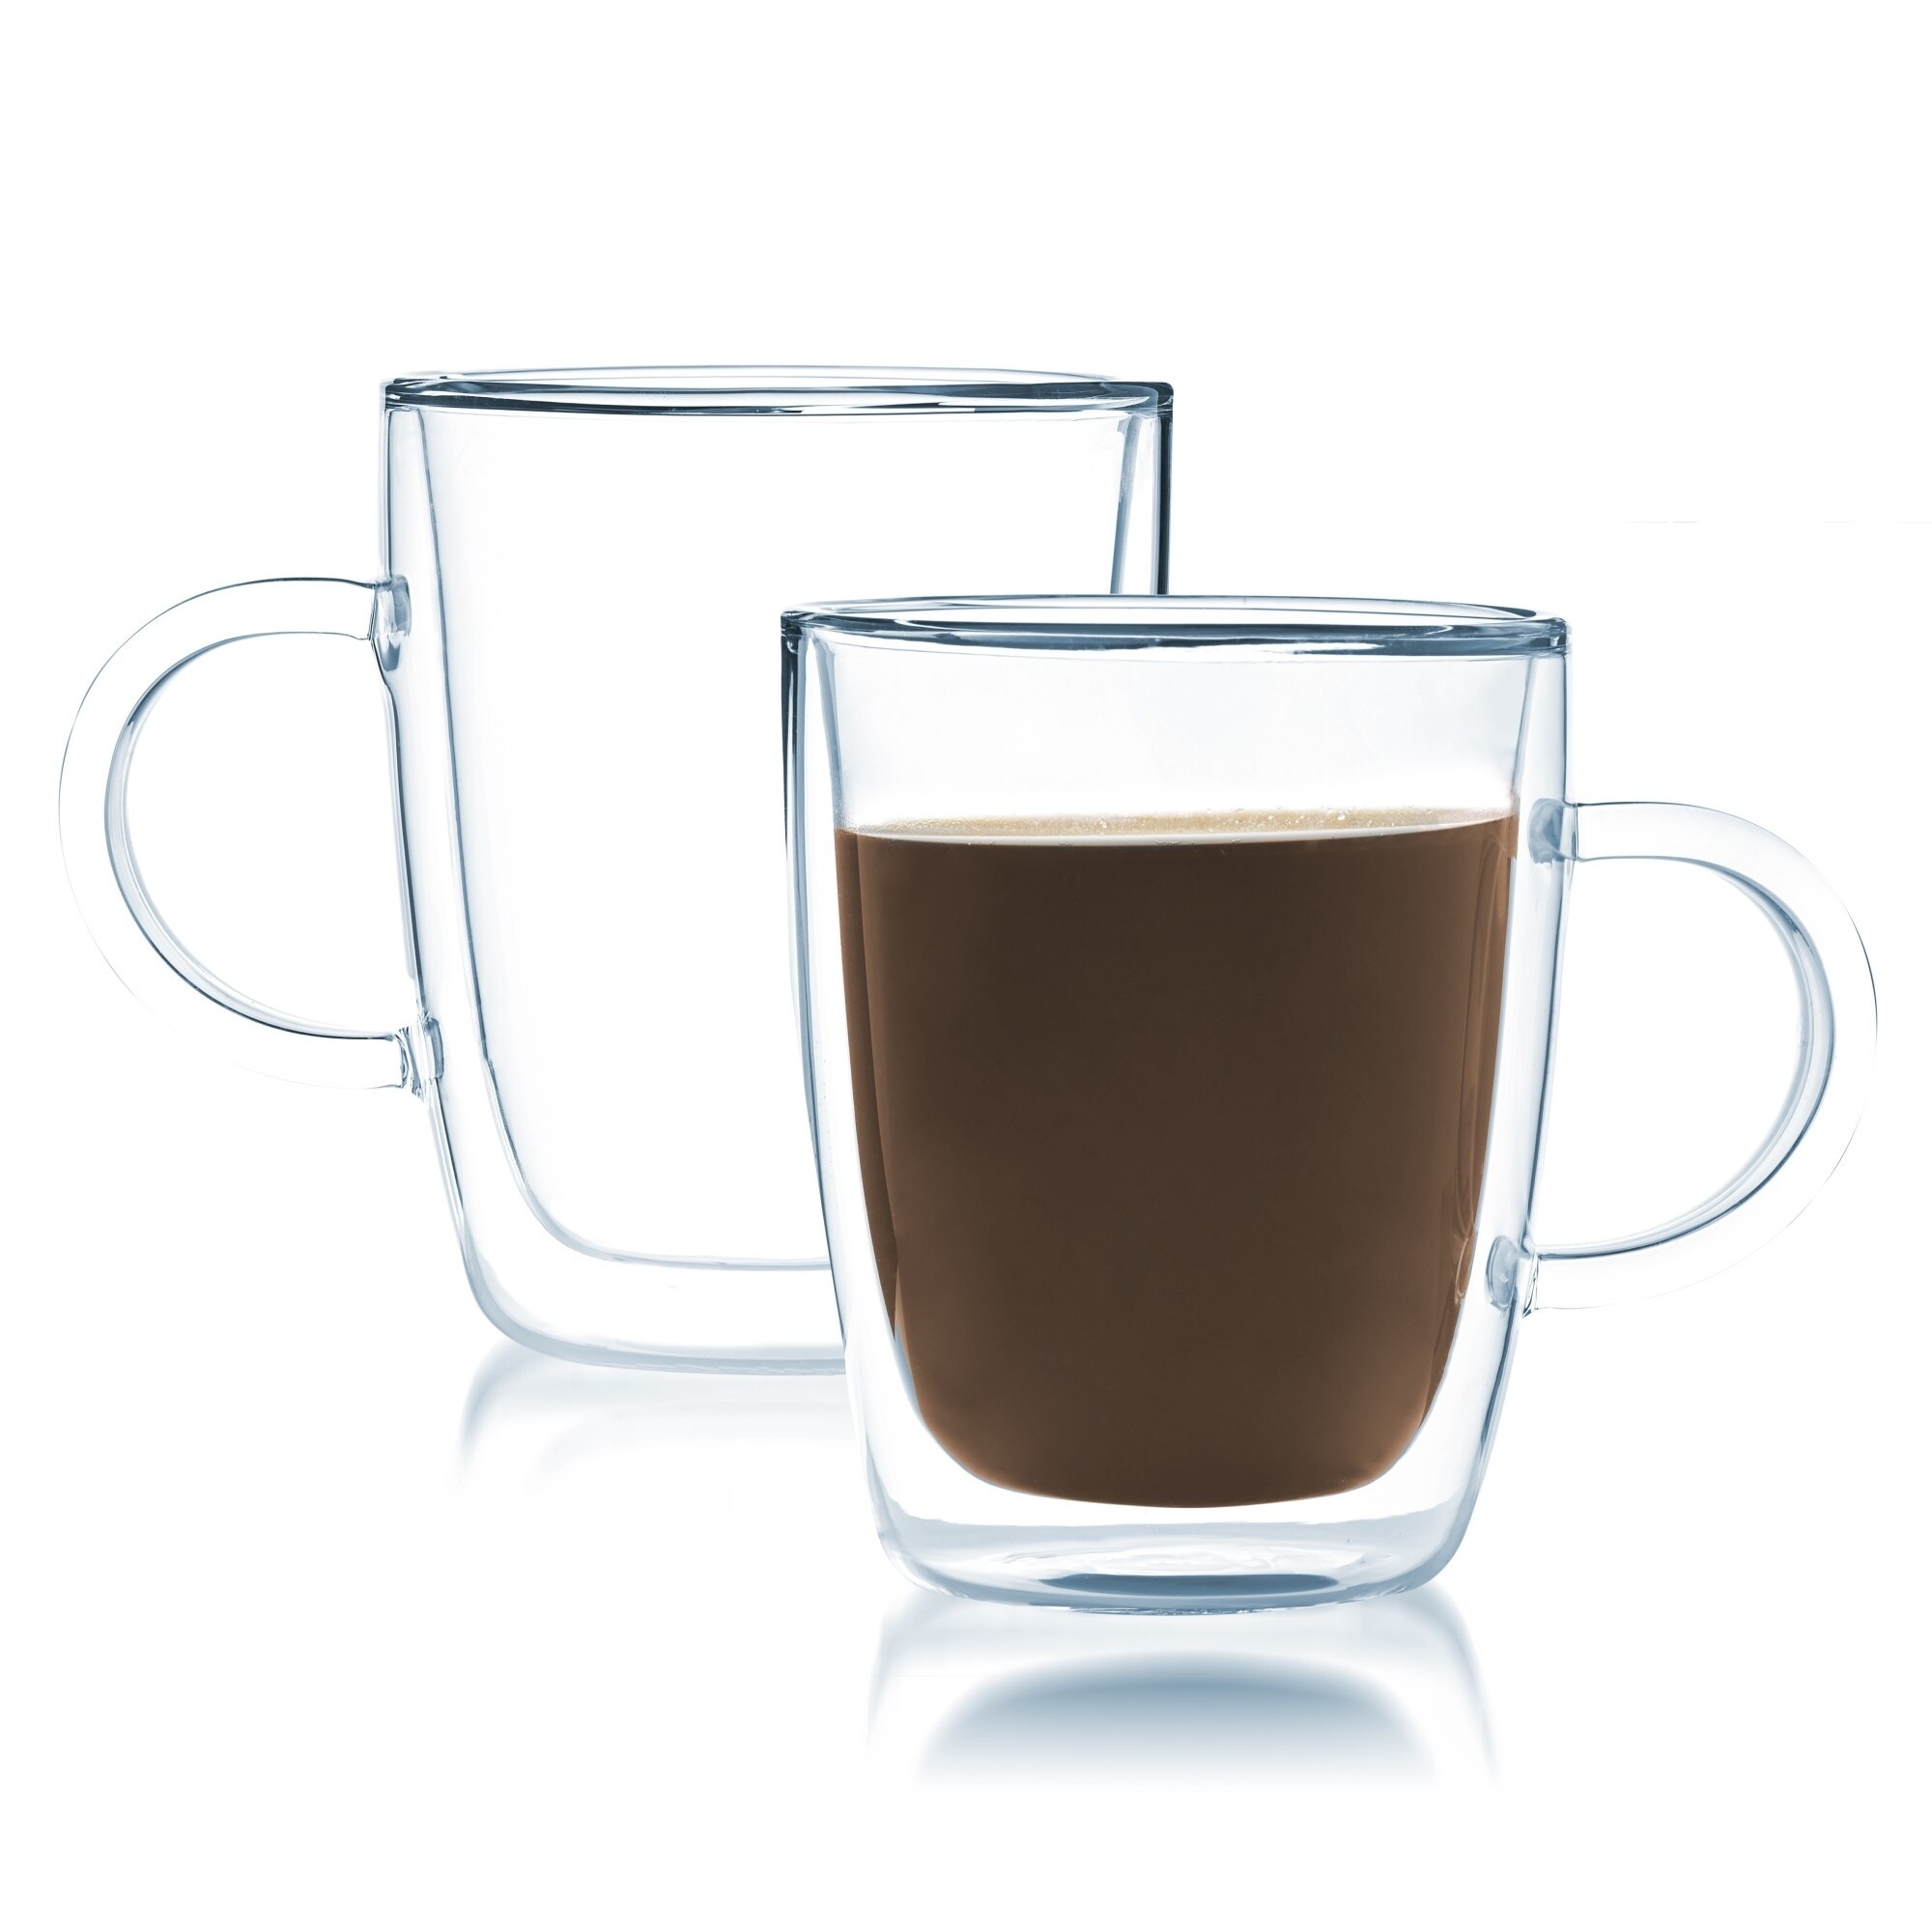 https://ak1.ostkcdn.com/images/products/14427918/Javafly-Double-walled-Clear-Glass-12-ounce-Coffee-Cup-Set-of-2-787db474-4a66-4476-8f77-947b086f0224.jpg